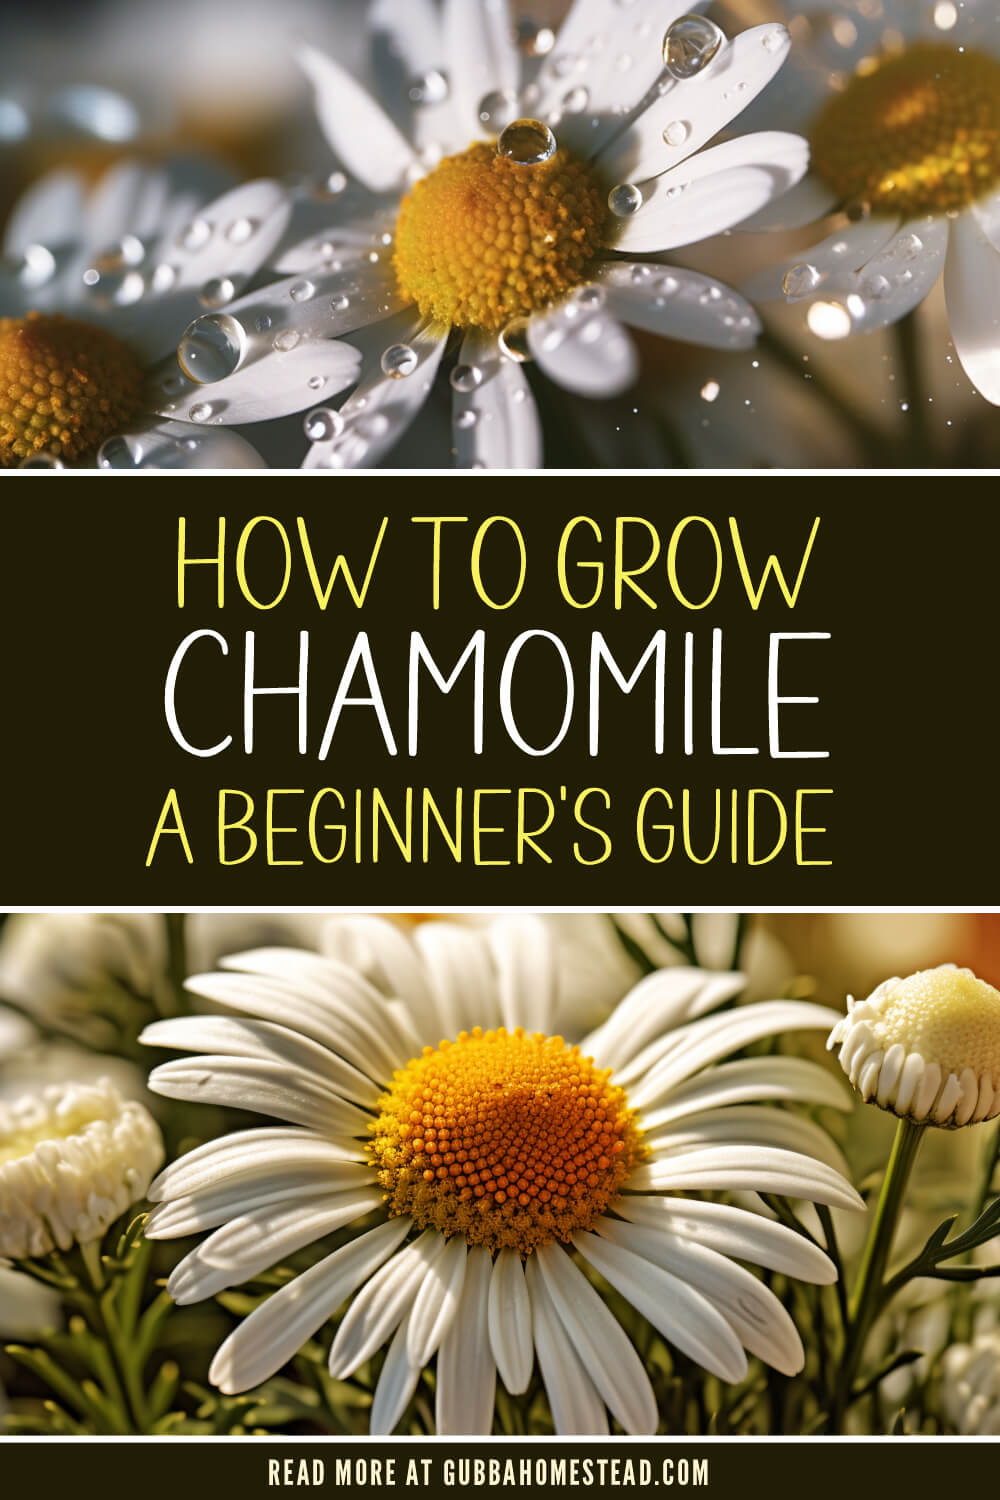 How to Grow Chamomile: A Beginner’s Guide